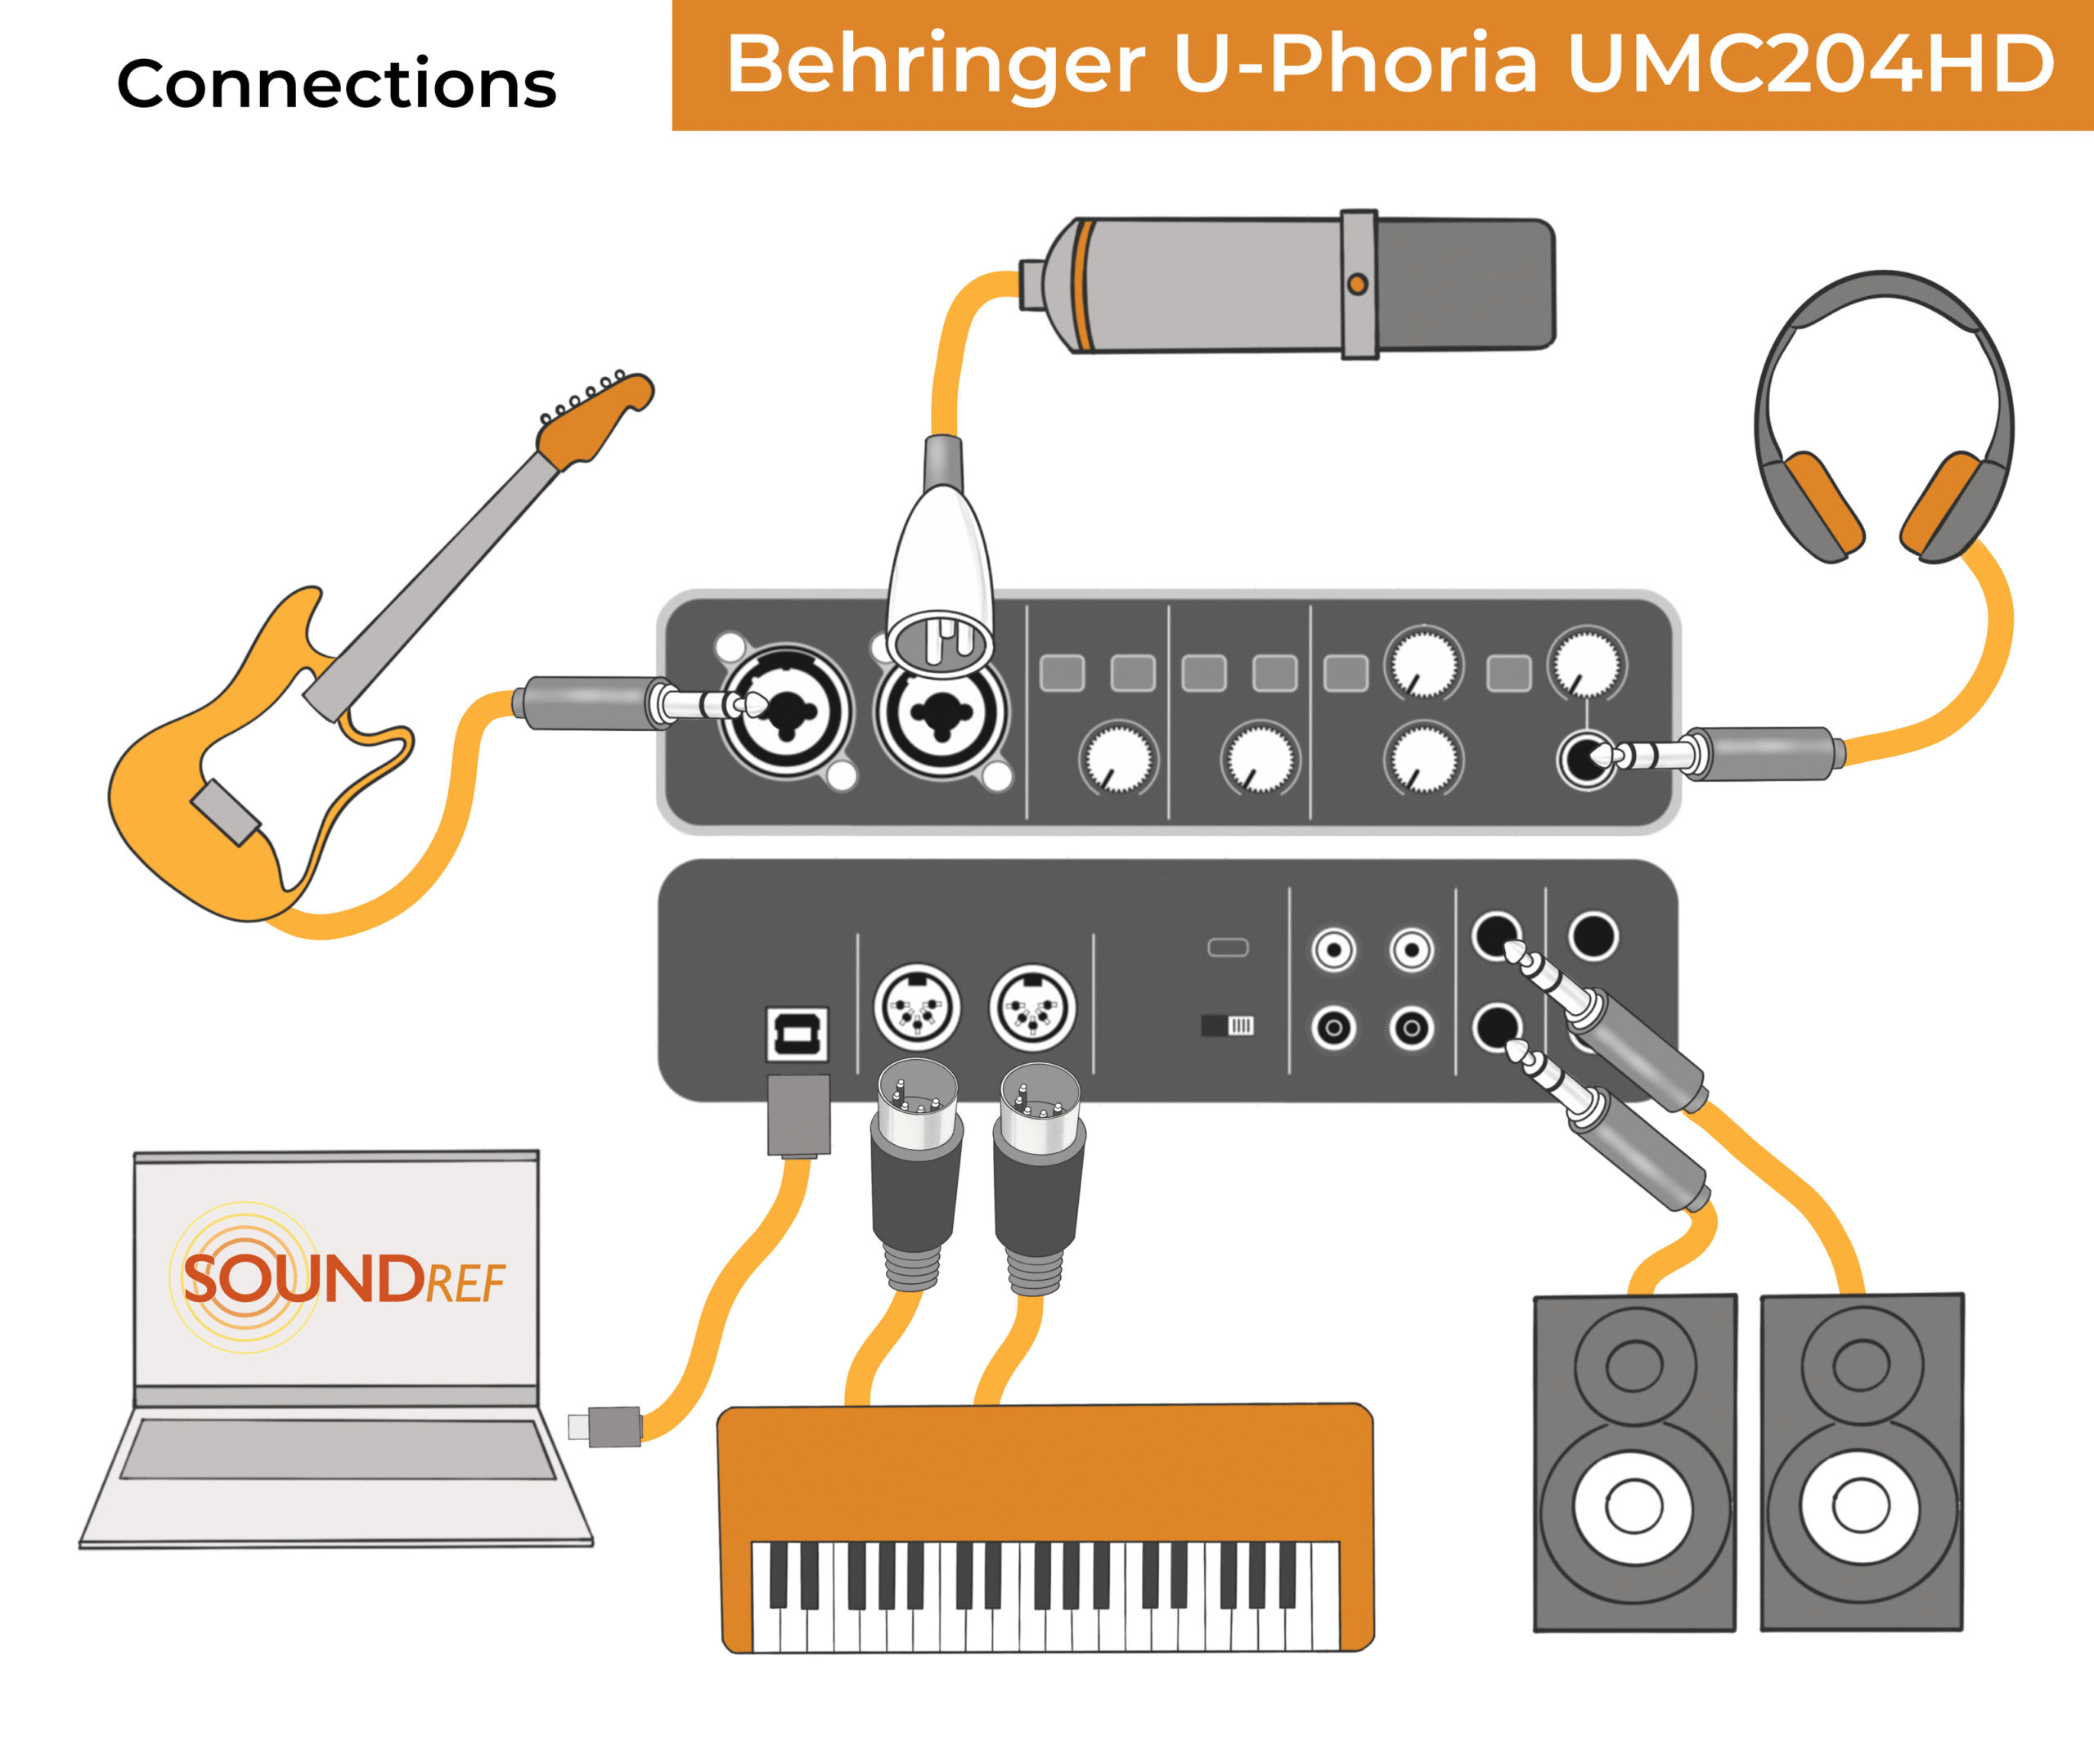 Connecting the Behringer UMC204HD